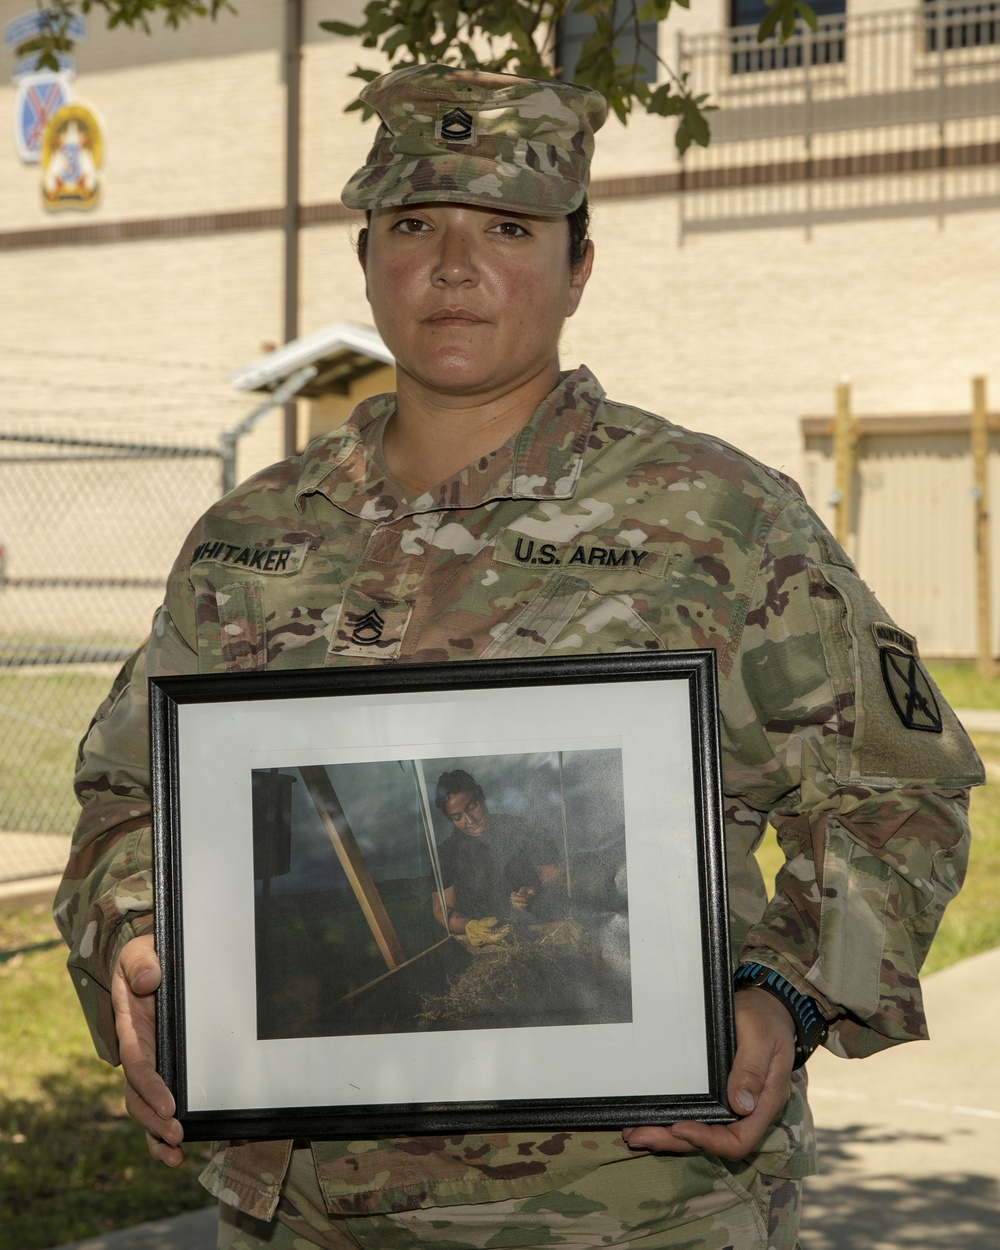 Brigade mortuary affairs specialist reflects on working with fallen service members